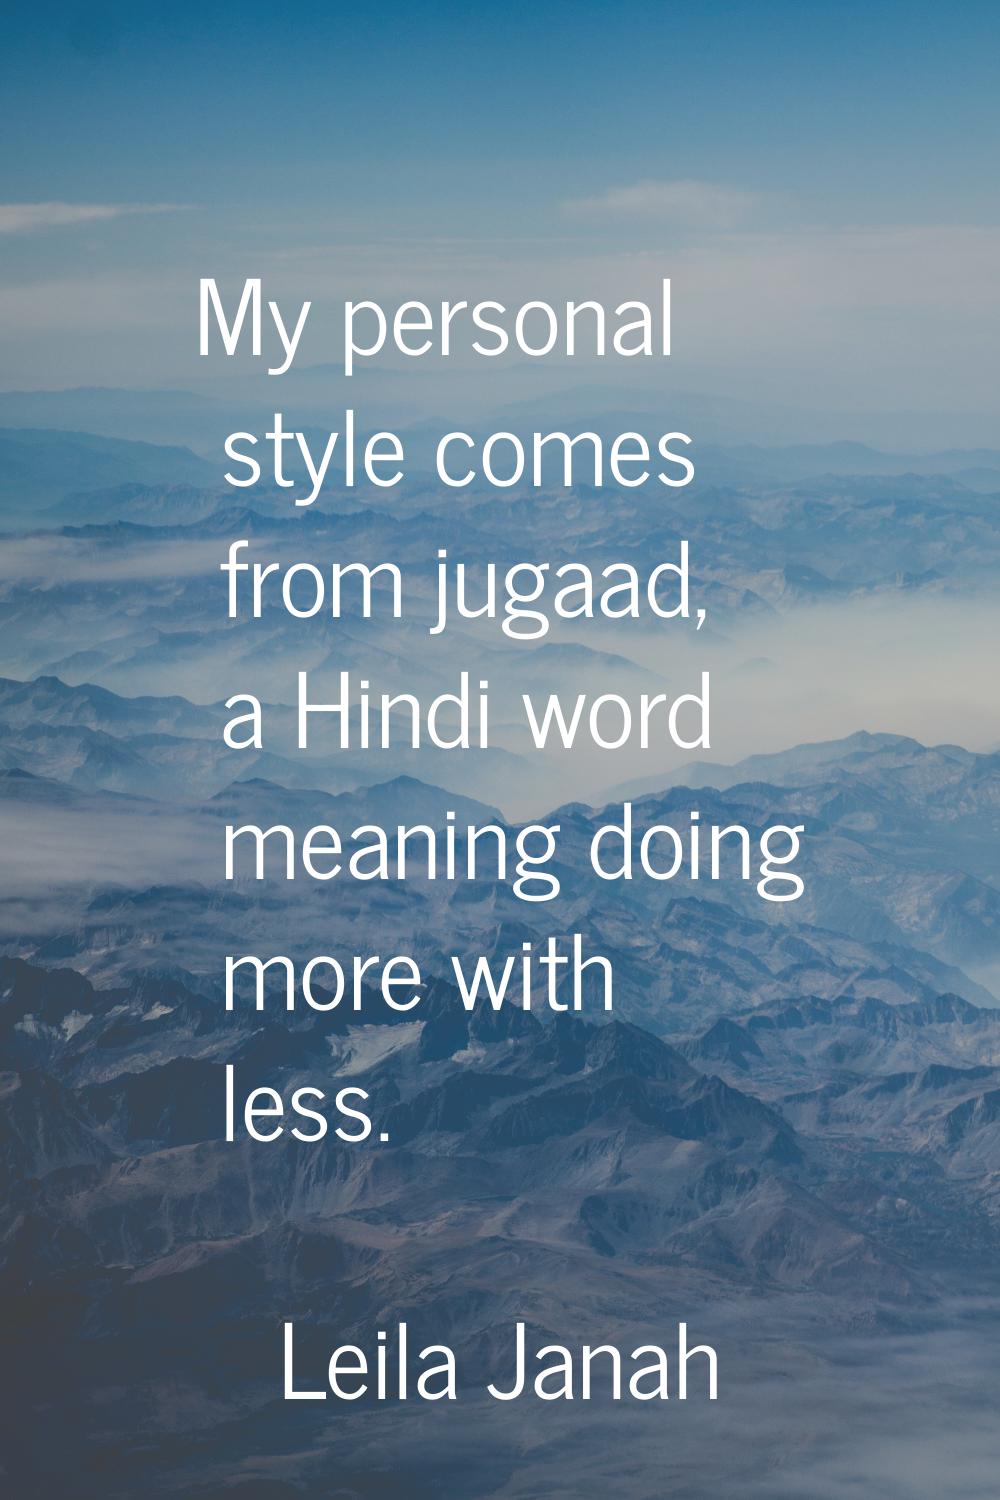 My personal style comes from jugaad, a Hindi word meaning doing more with less.